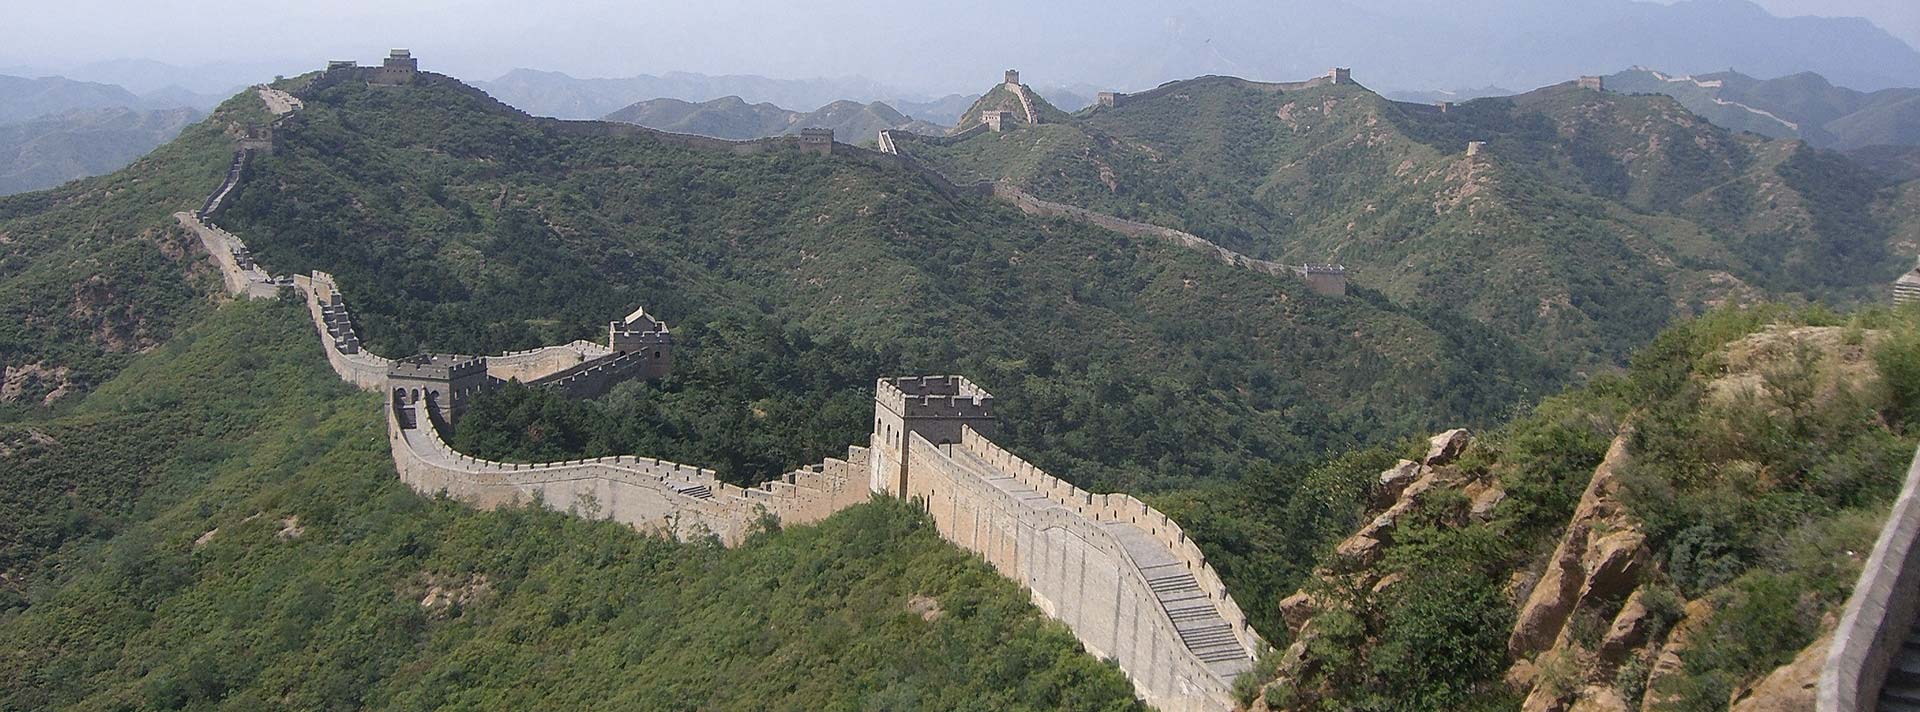 Discounted flight tickets from Los Angeles to Beijing - IFlyFirstClass